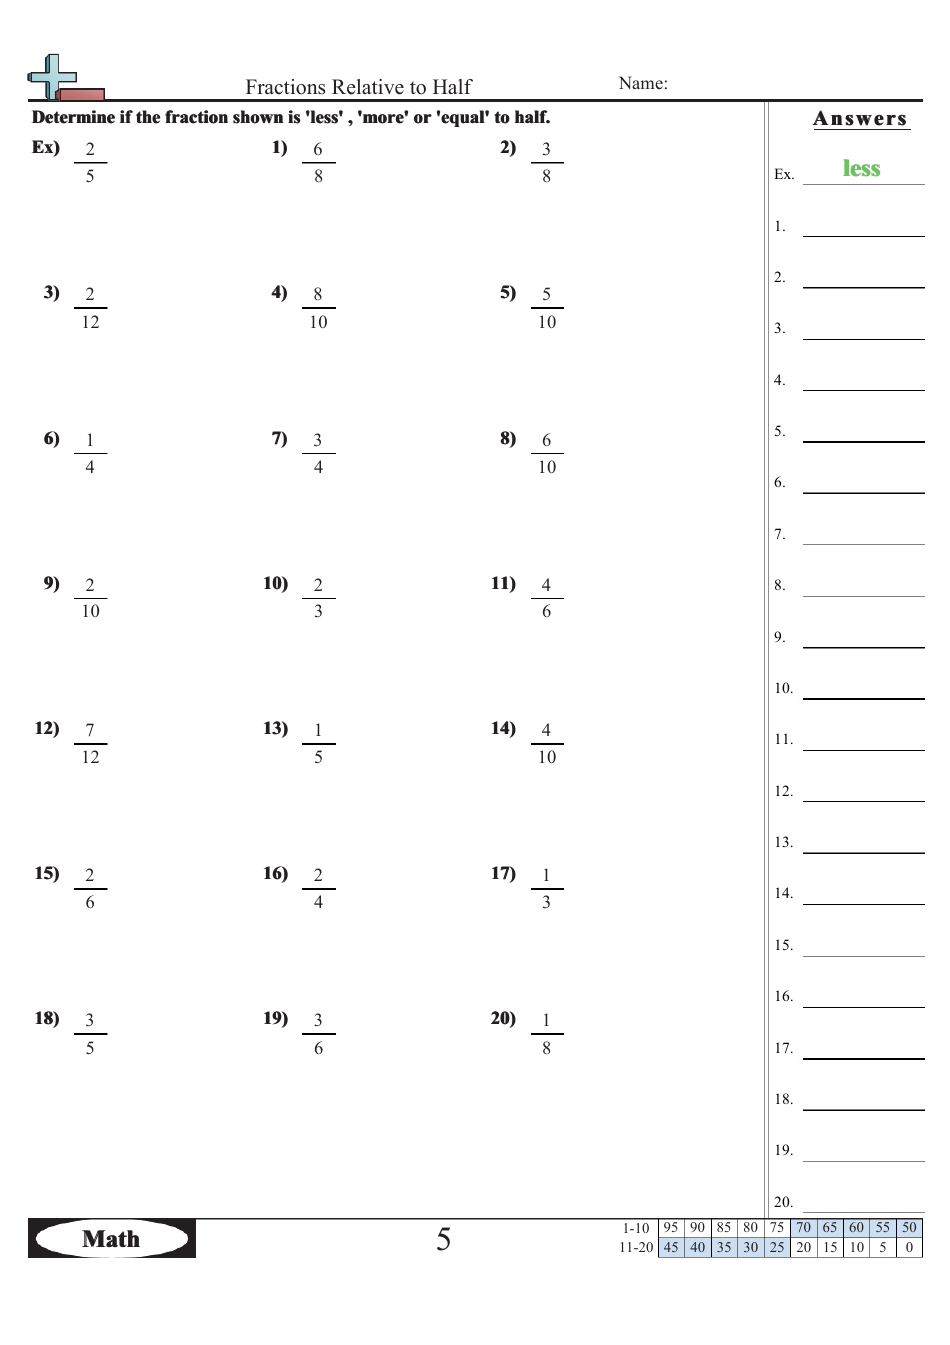 Fractions Relative to Half Worksheet With Answer Key - Image Preview Alternate View